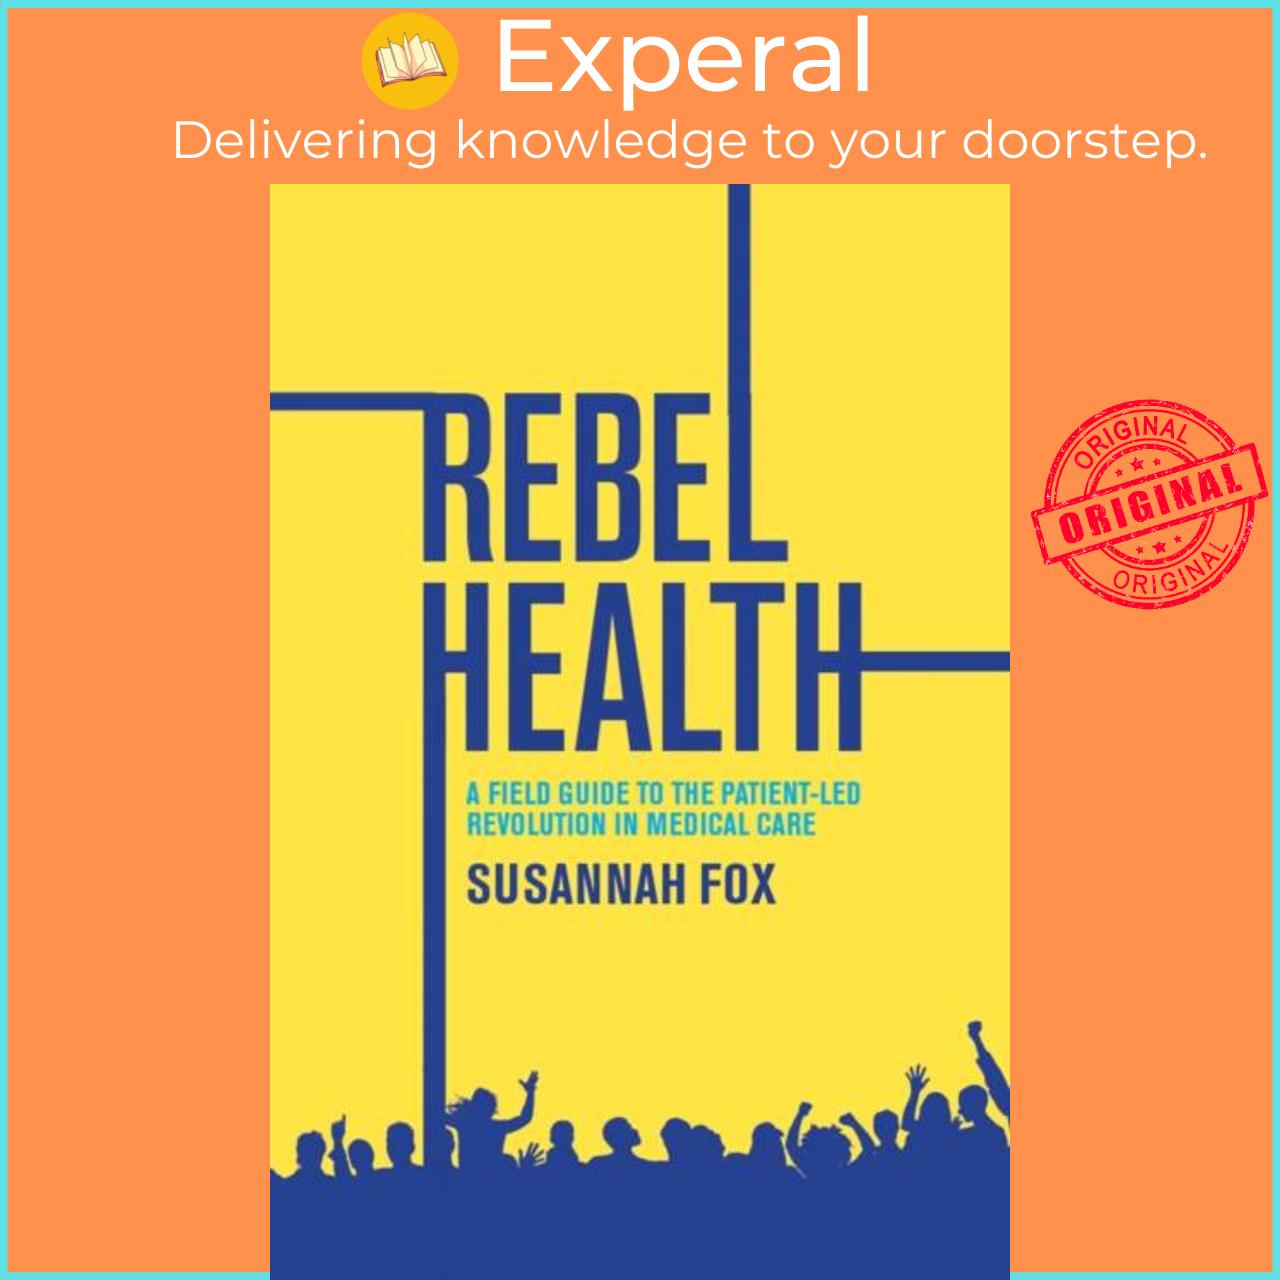 Hình ảnh Sách - Rebel Health - A Field Guide to the Patient-Led Revolution in Medical Car by Susannah Fox (UK edition, hardcover)